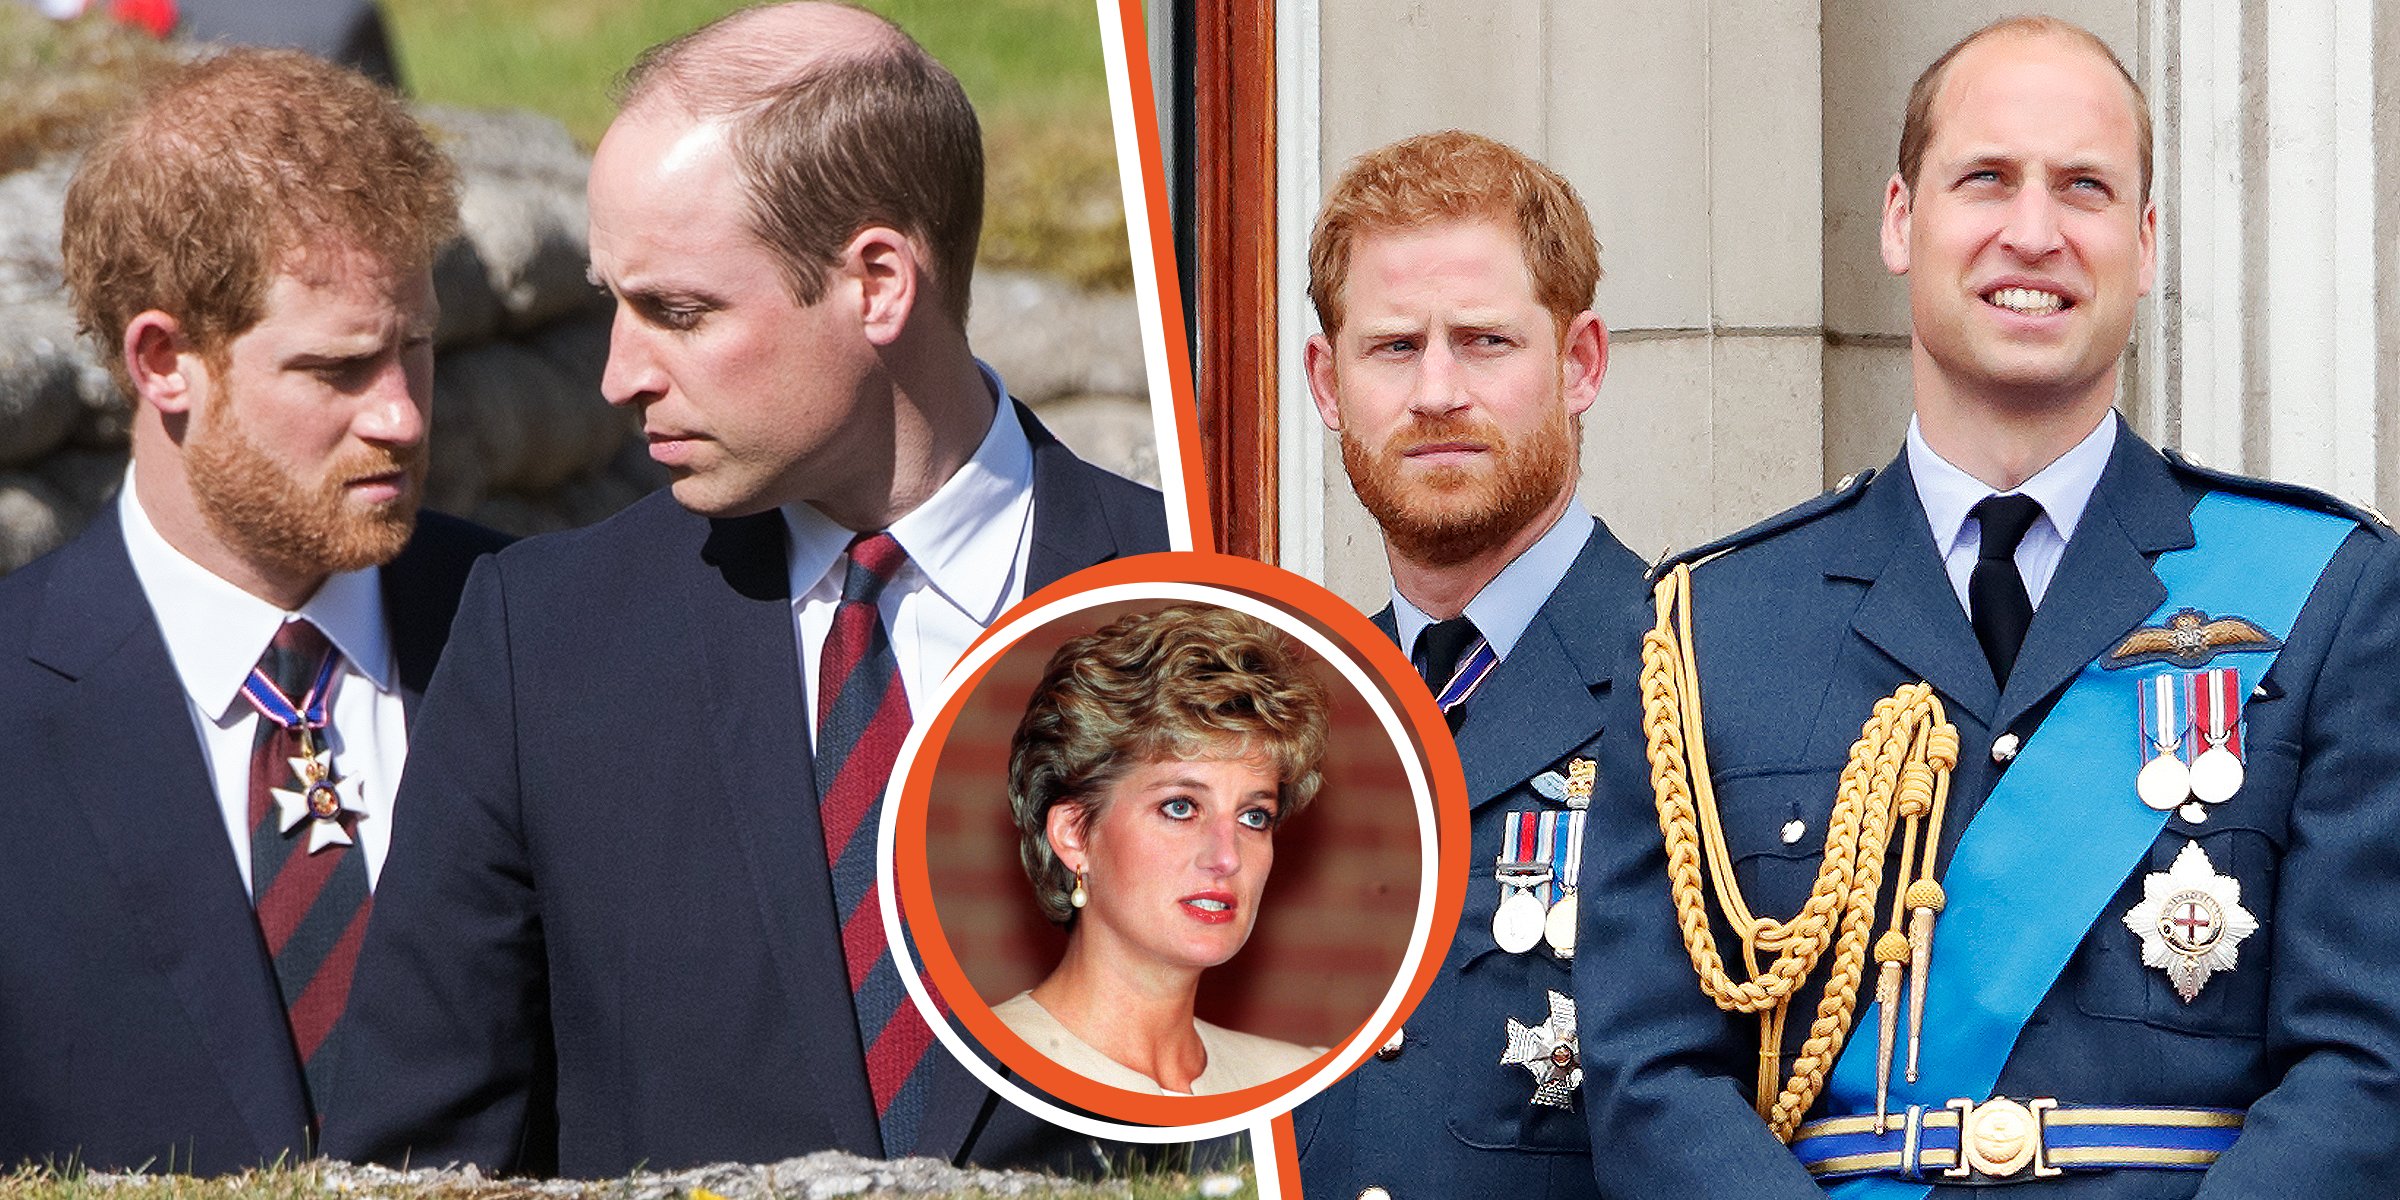 Prince Harry and Prince William | Lady Diana Spencer | Prince Harry and Prince William | Source: Getty Images